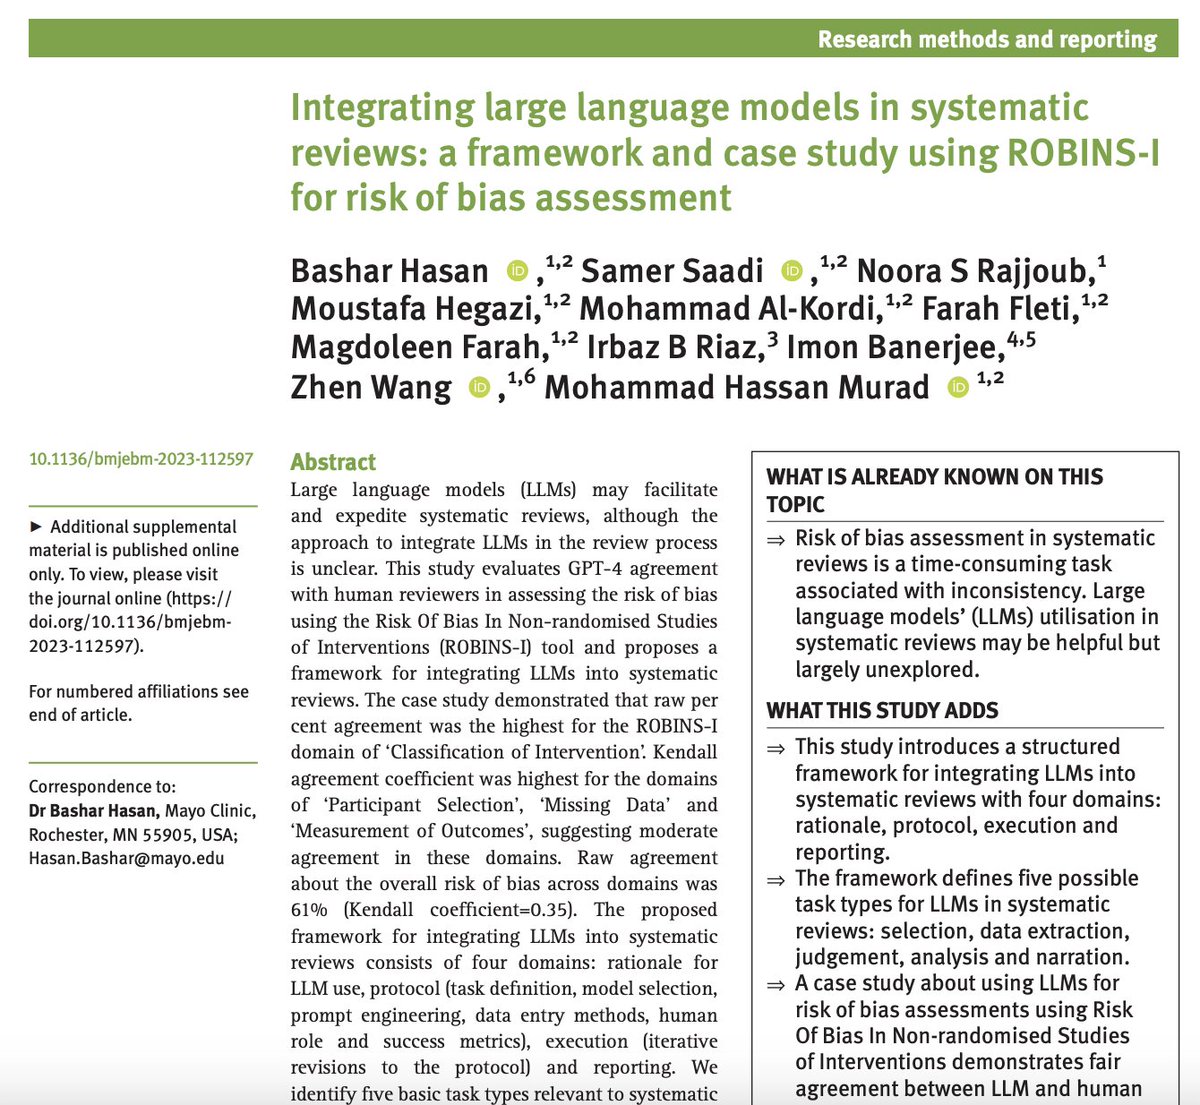 Integrating large language models in systematic reviews: a framework and case study using ROBINS-I for risk of bias assessment Research Methods and Reporting by @BasharHasanMD @M_Hassan_Murad et al. Link: bit.ly/49xK2Uz